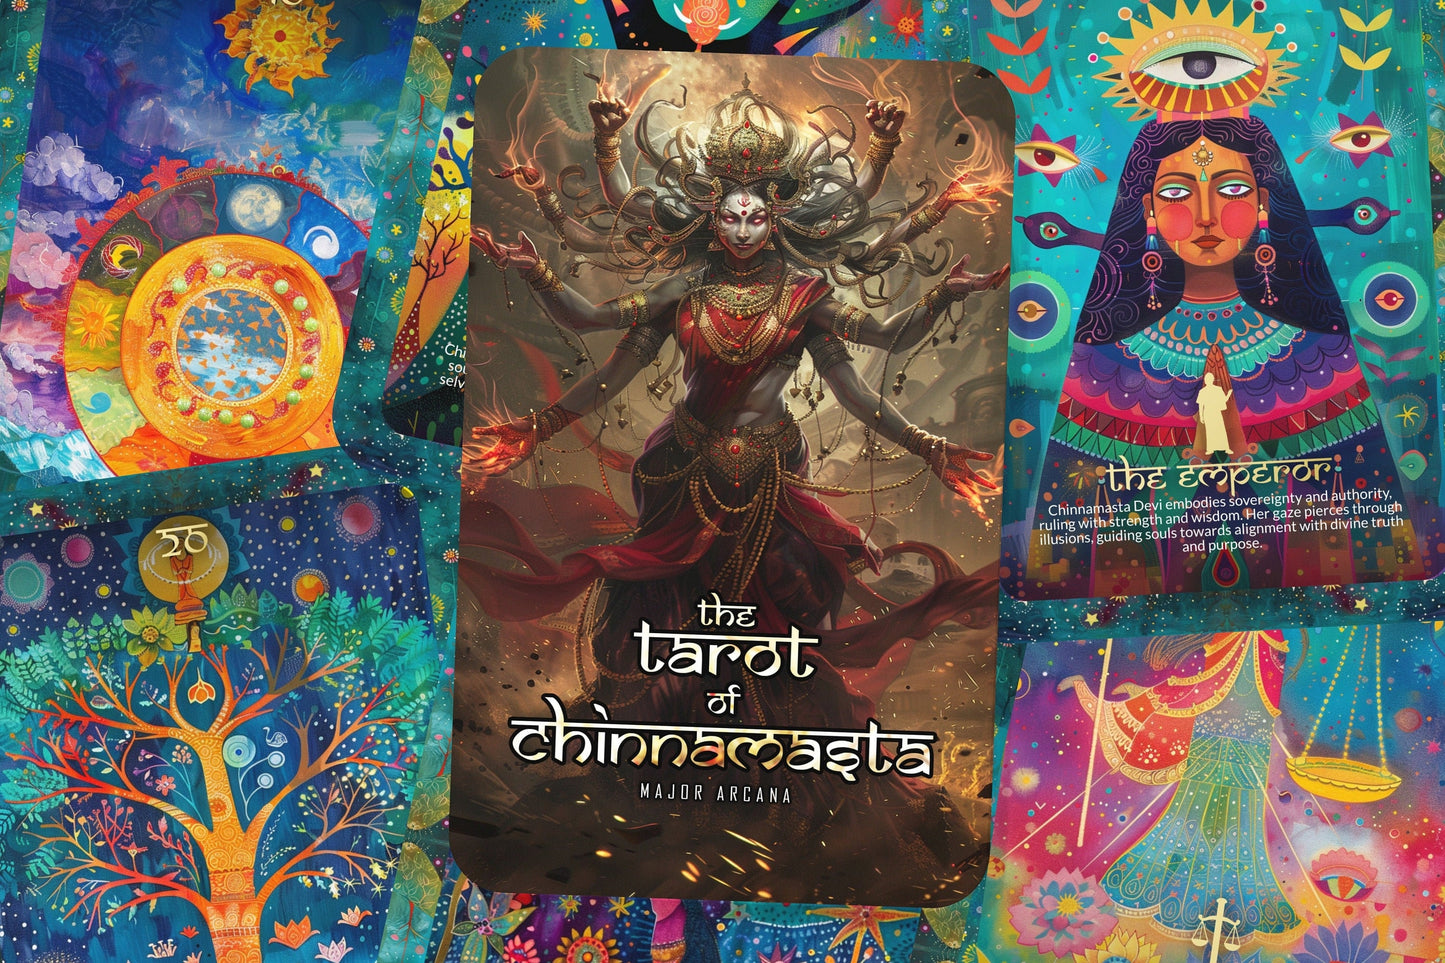 The Tarot of Chinnamasta - Major Arcana - A unique spiritual journey - The Hindu deity known for removing obstacles and bringing wisdom.